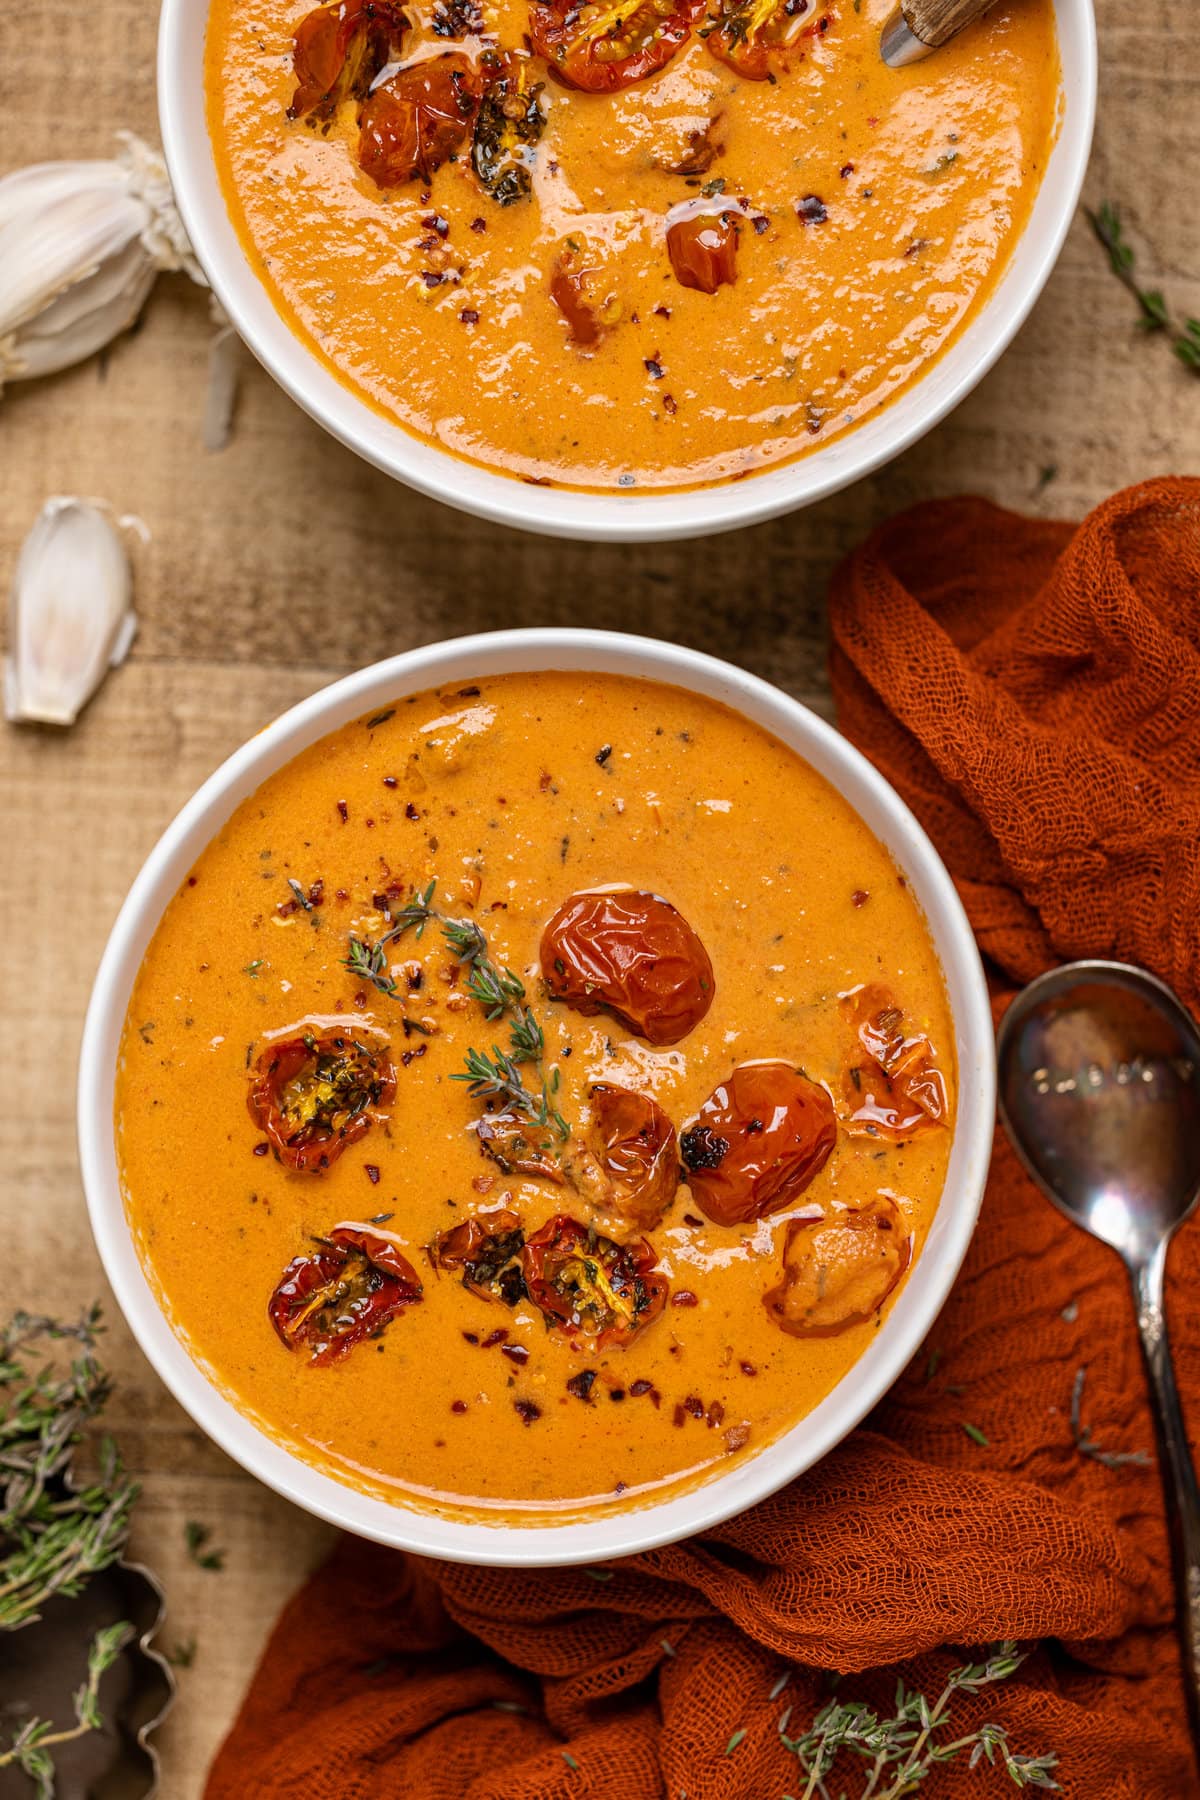 https://www.orchidsandsweettea.com/wp-content/uploads/2022/10/Roasted-Tomato-Soup-10-of-10.jpg